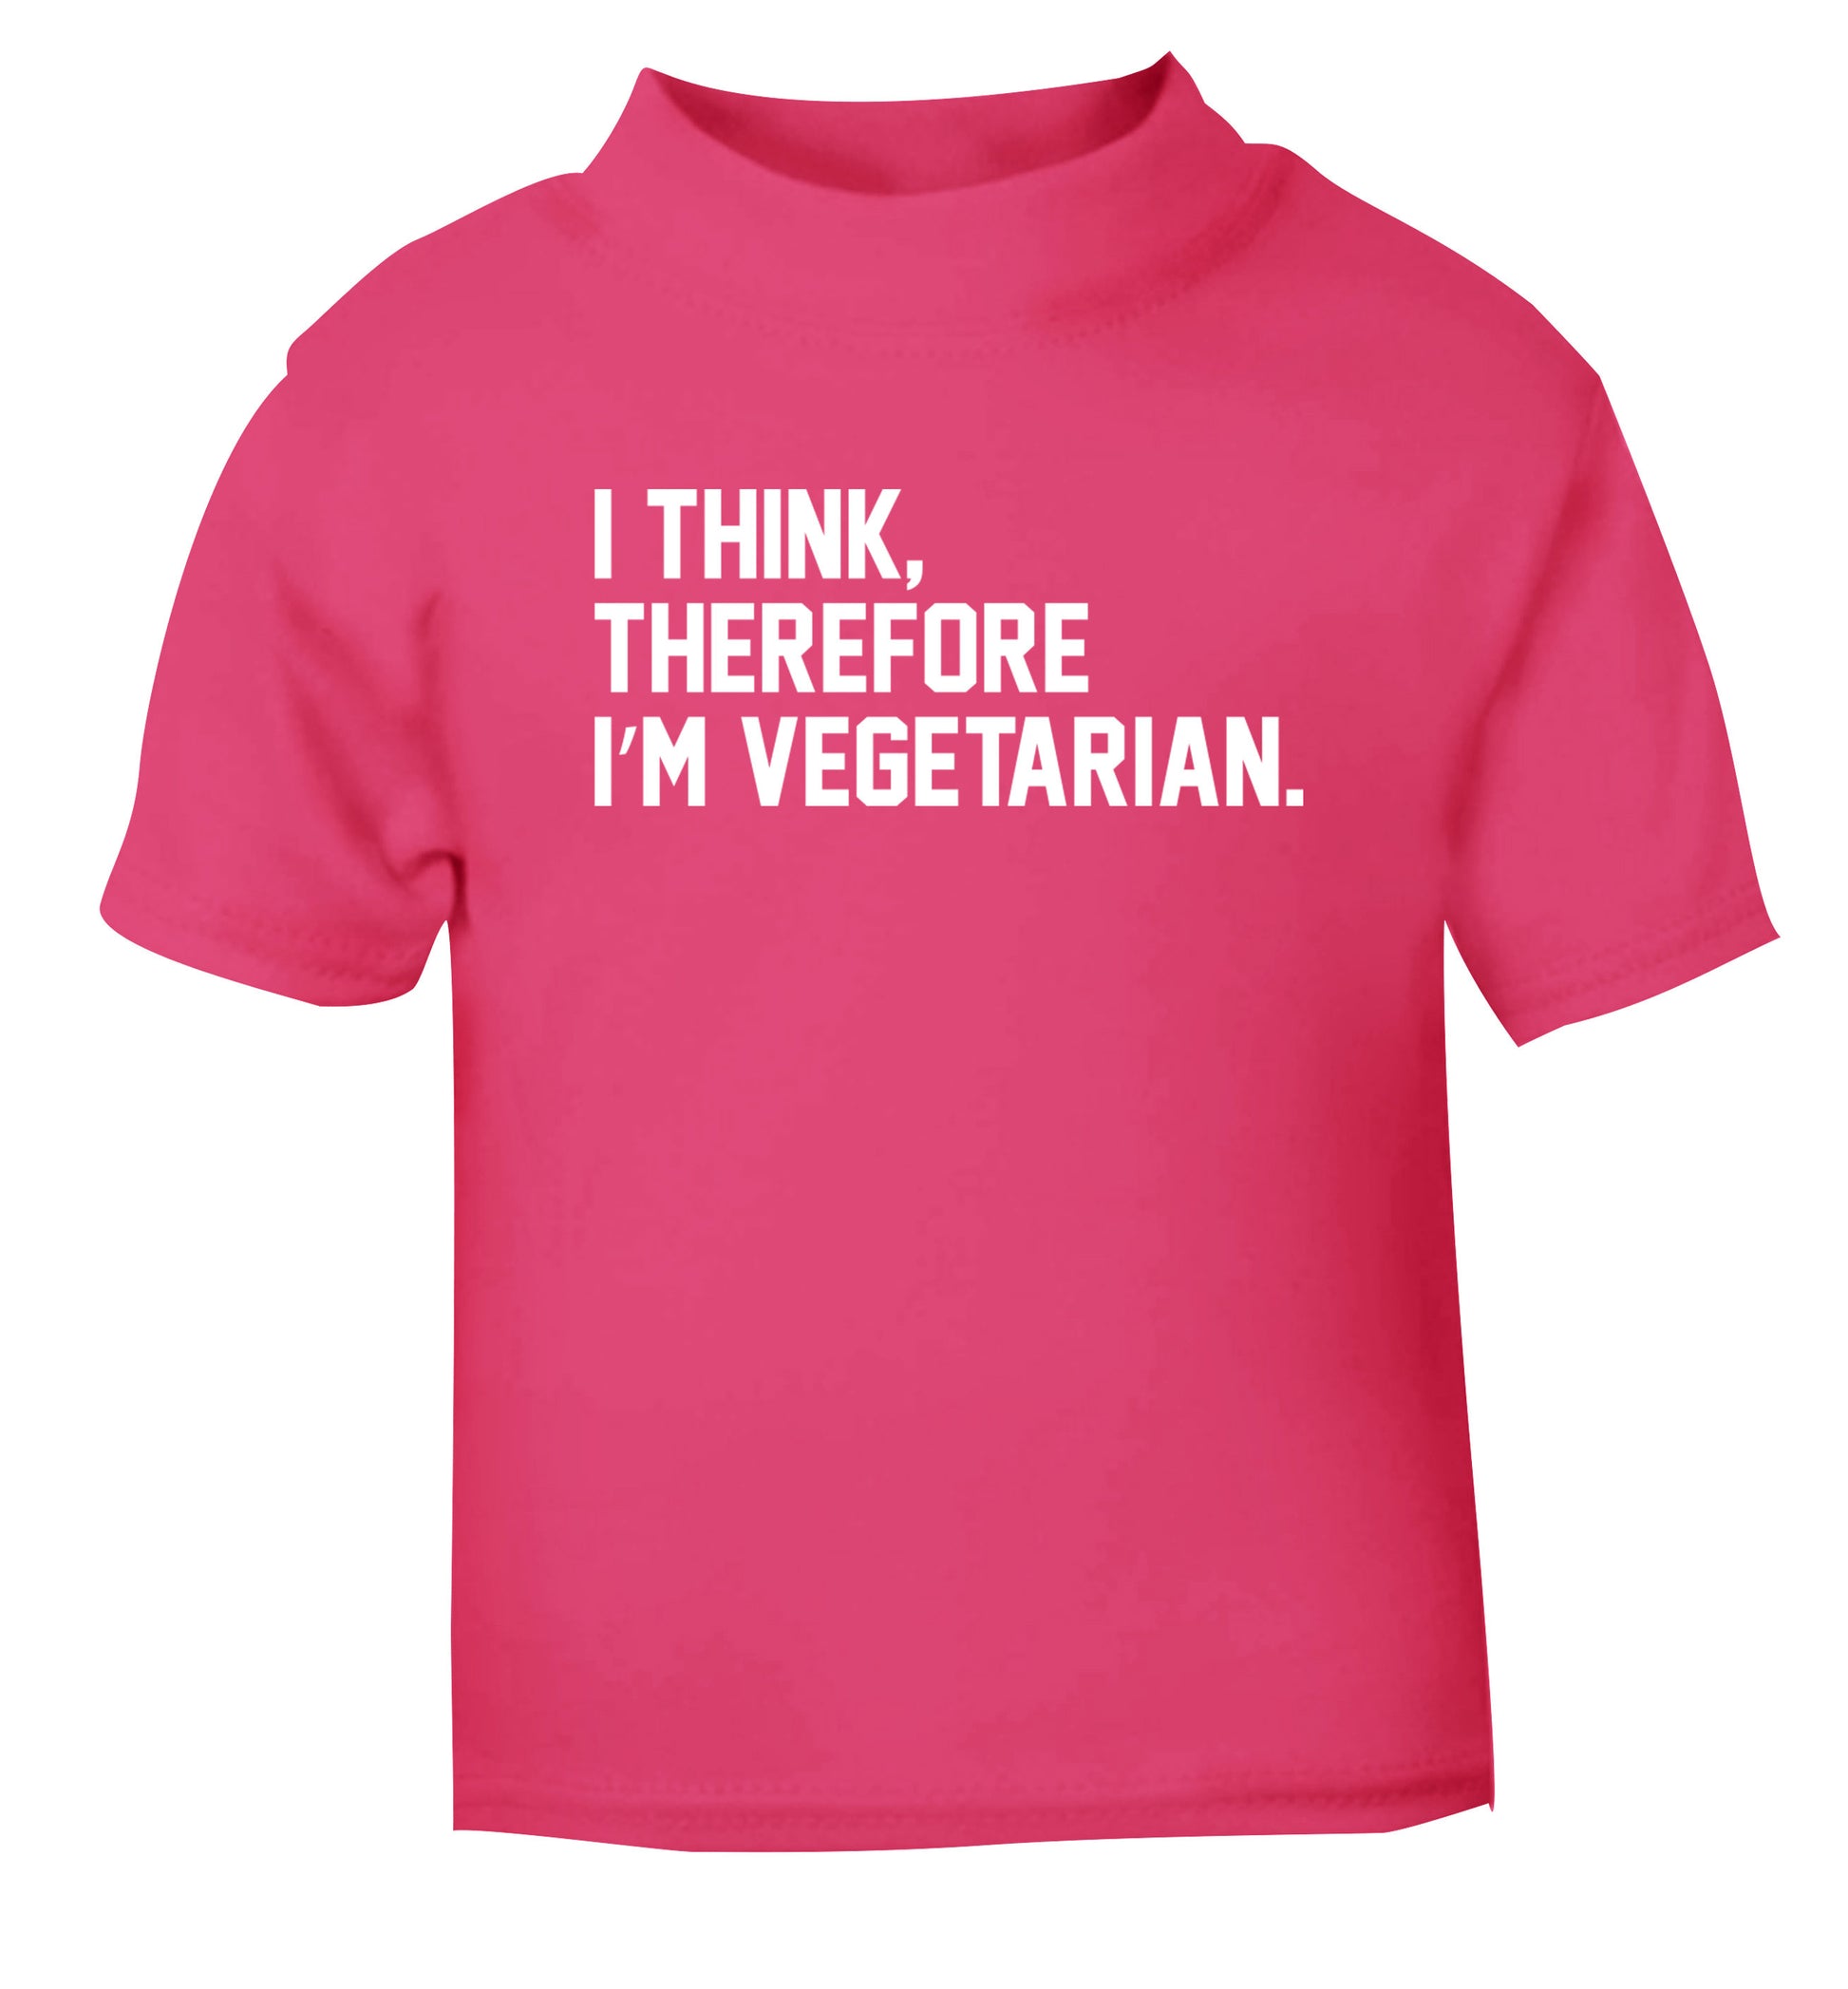 I think therefore I'm vegetarian pink Baby Toddler Tshirt 2 Years